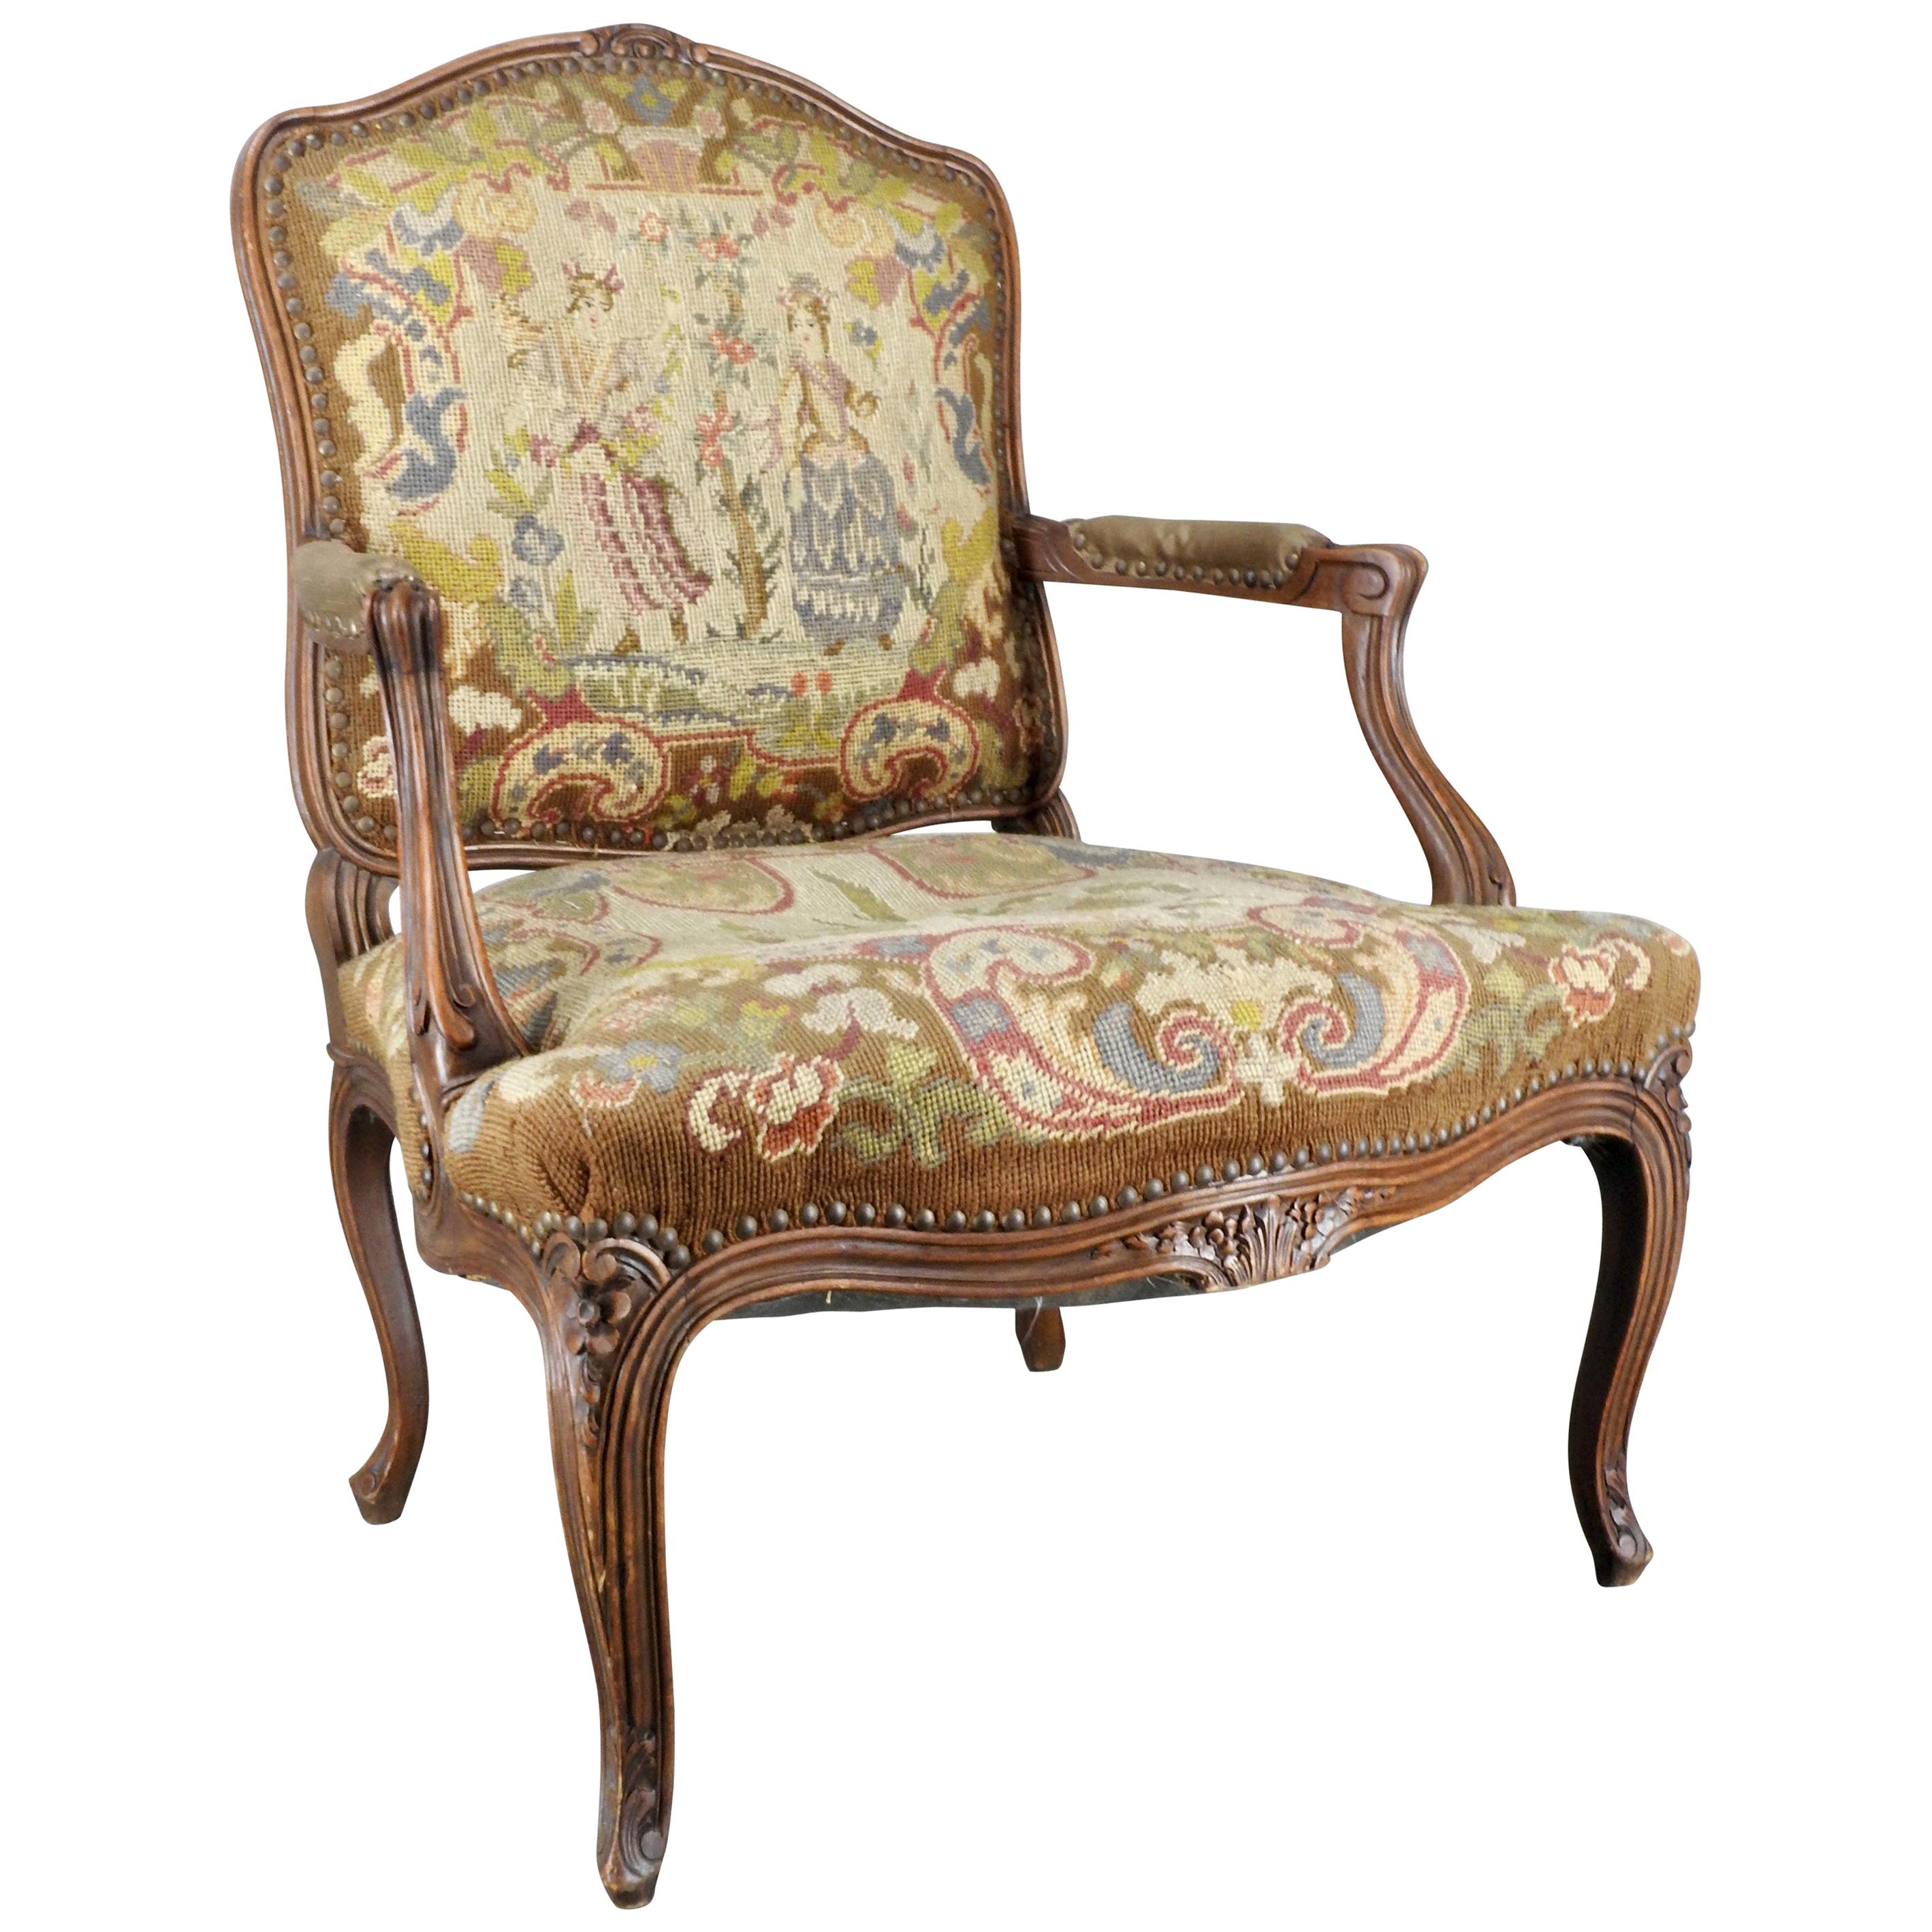 French Rococo Fauteuil with Needlepoint Upholstery For Sale